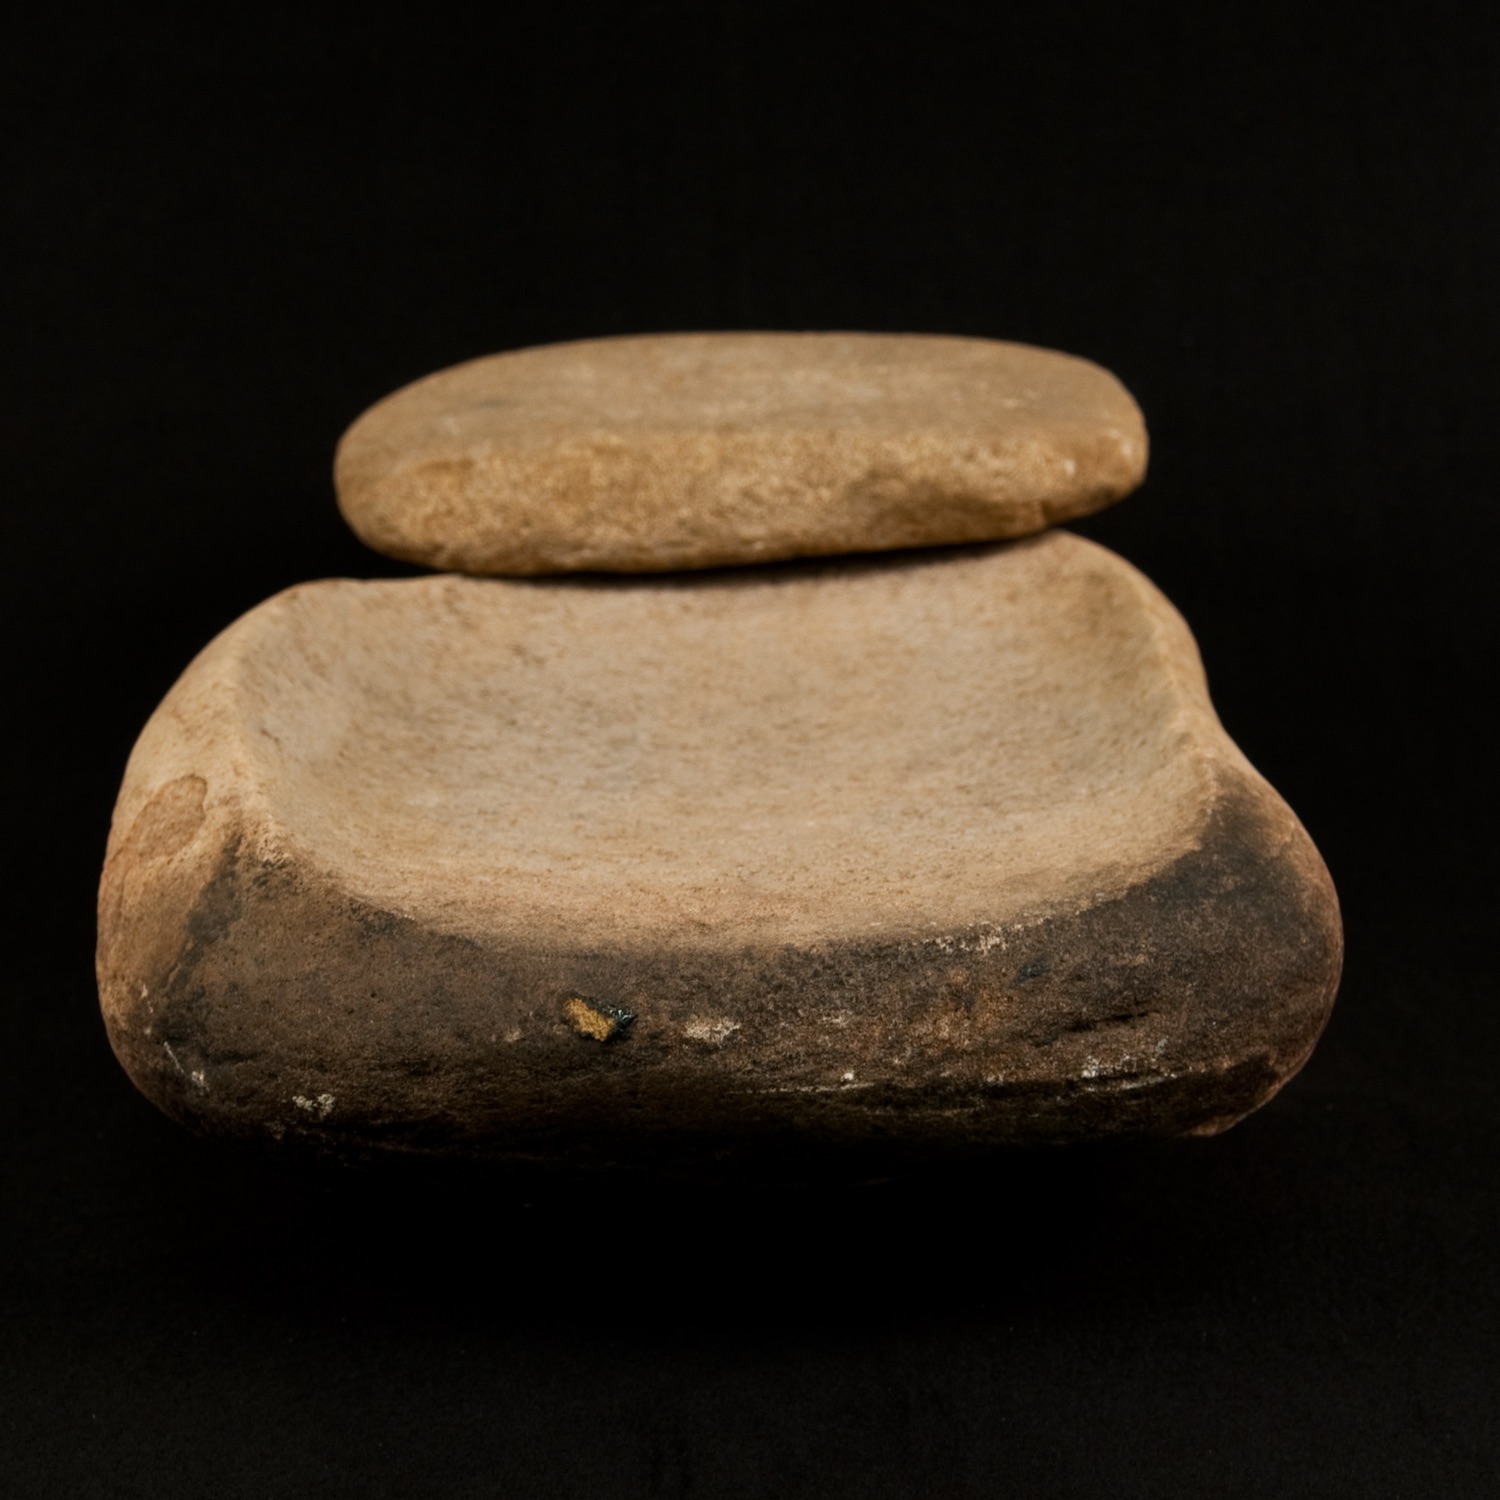 A mano and metate, used for grinding corn into meal.